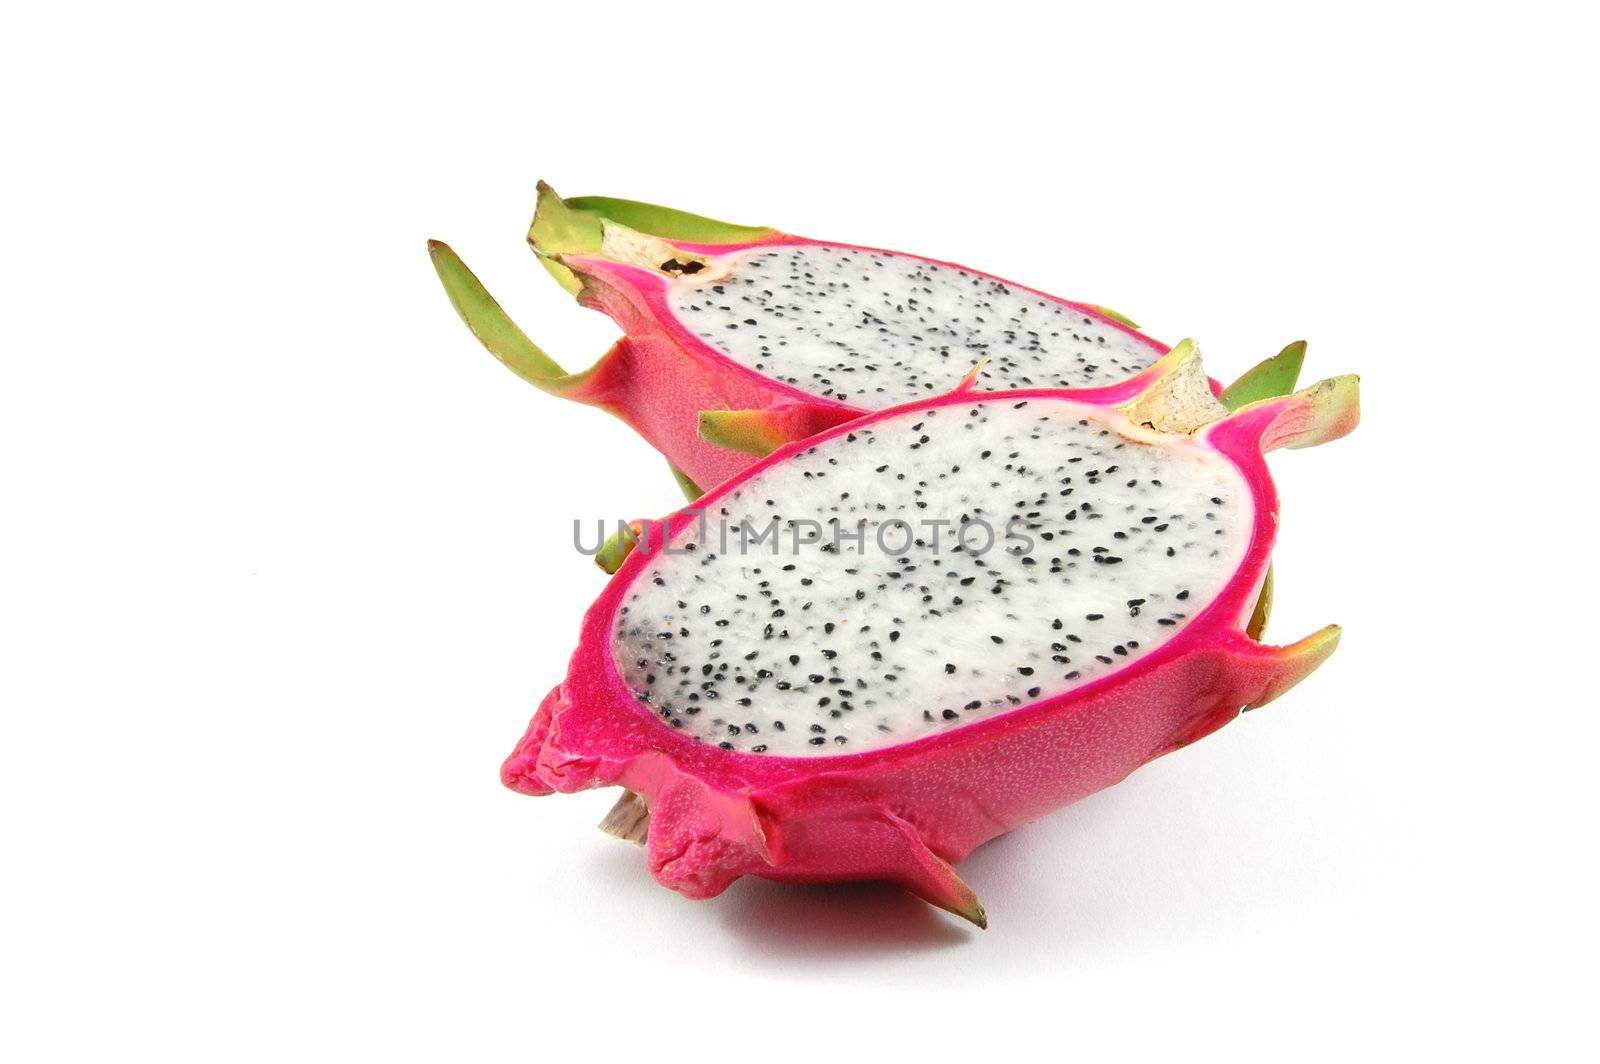 Exotic Dragon fruit isolated on a white background.